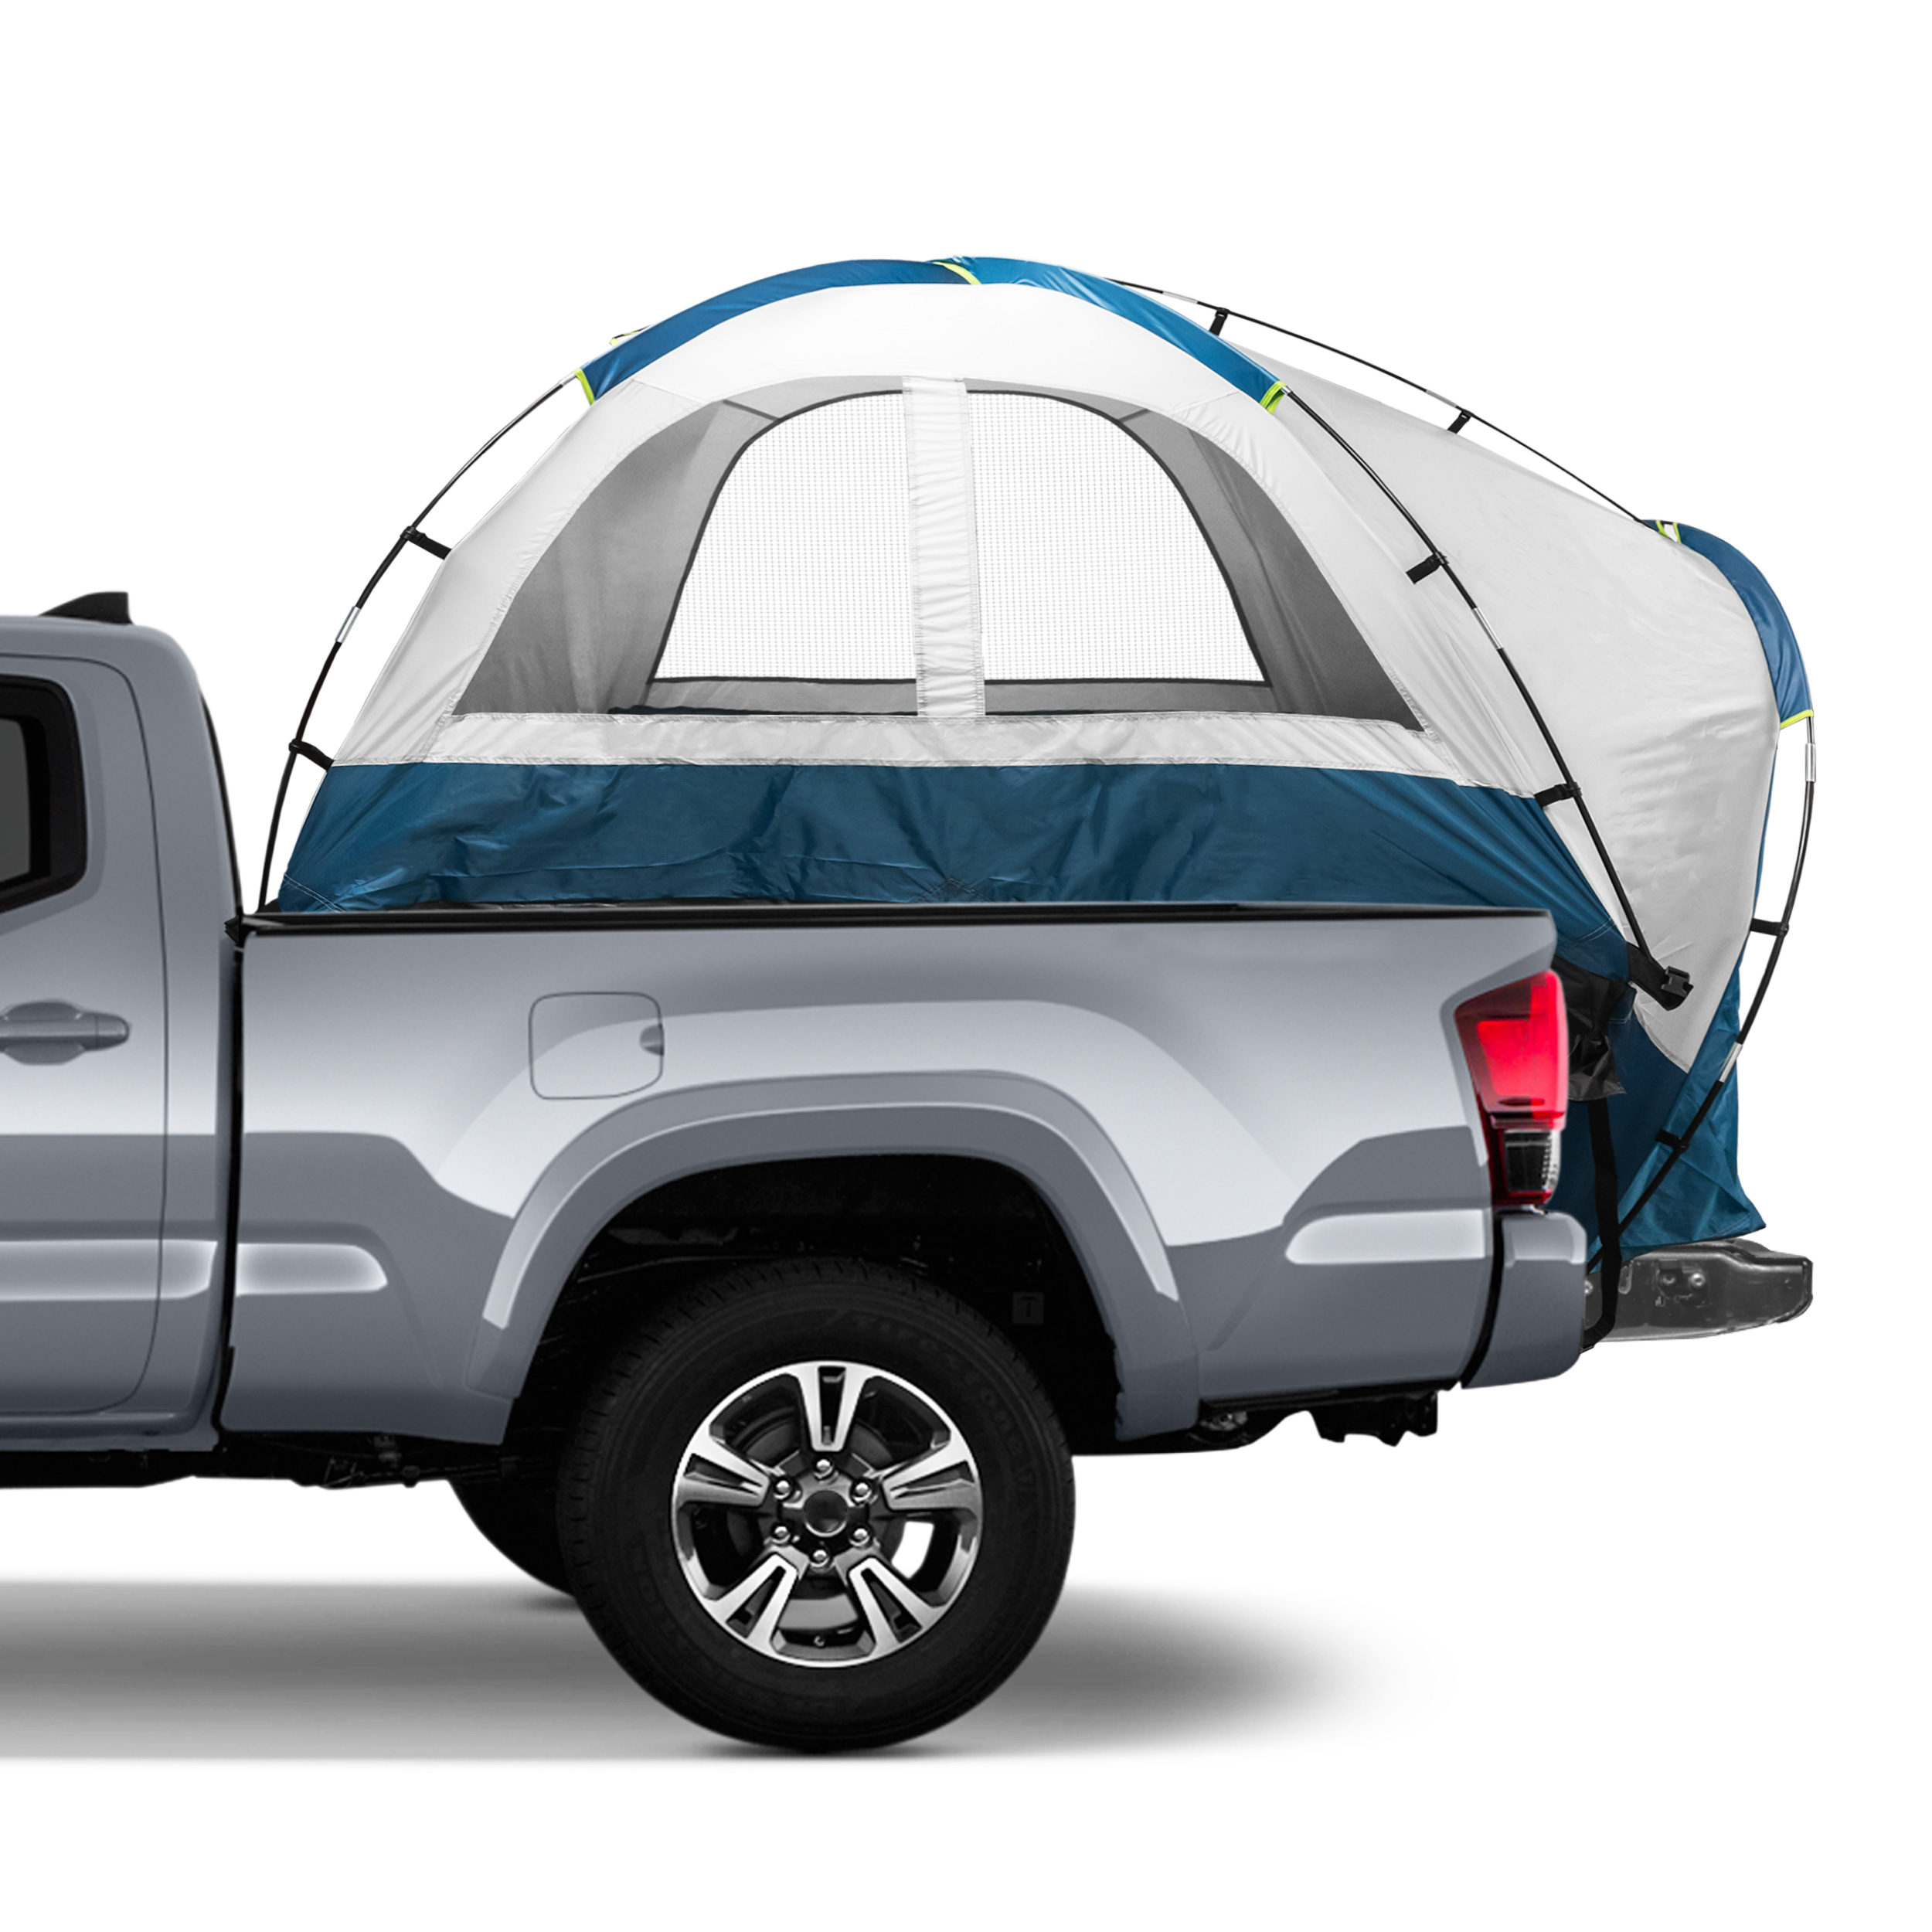 NEH Pickup Truck Bed Camping Tent, 2-Person Sleeping Capacity, Includes Rainfly and Storage Bag - Fits Full Size Truck with Regular Bed - 76"-80" (6.4'-6.7') - Gray and Blue - image 2 of 8